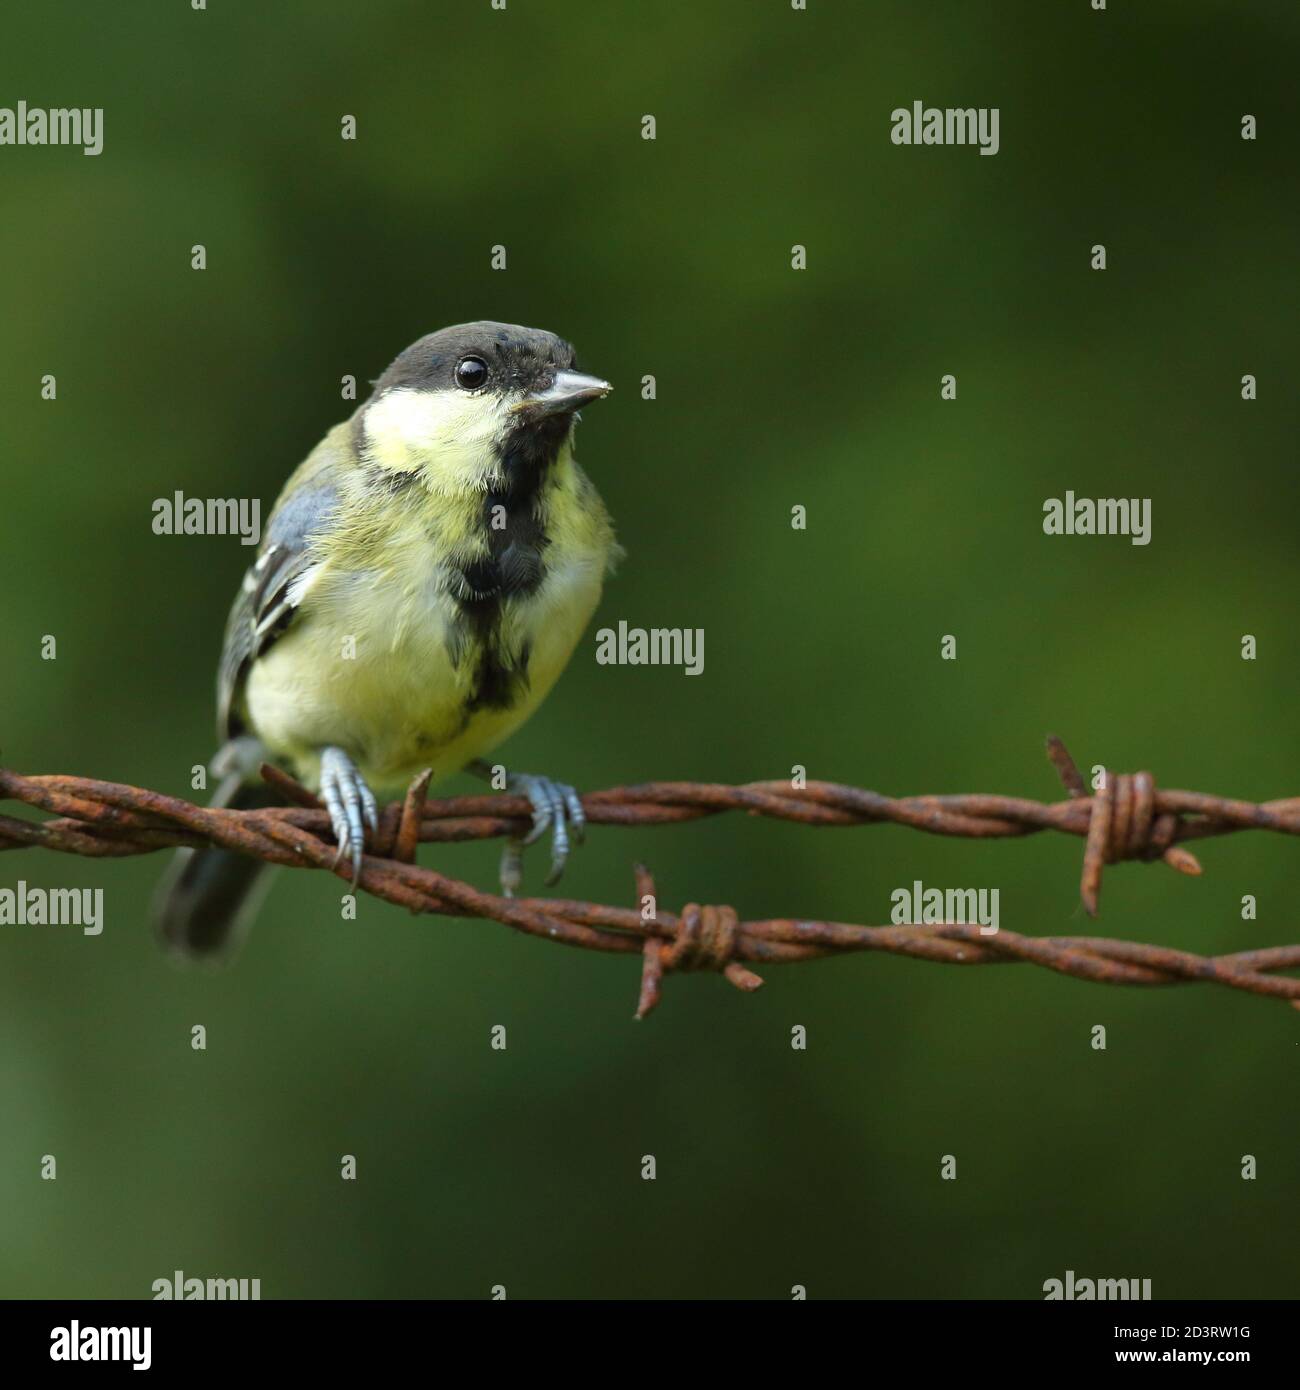 A photo of a juvenile Great Tit bird ( Parus major ), taken in Wales 2020. Stock Photo